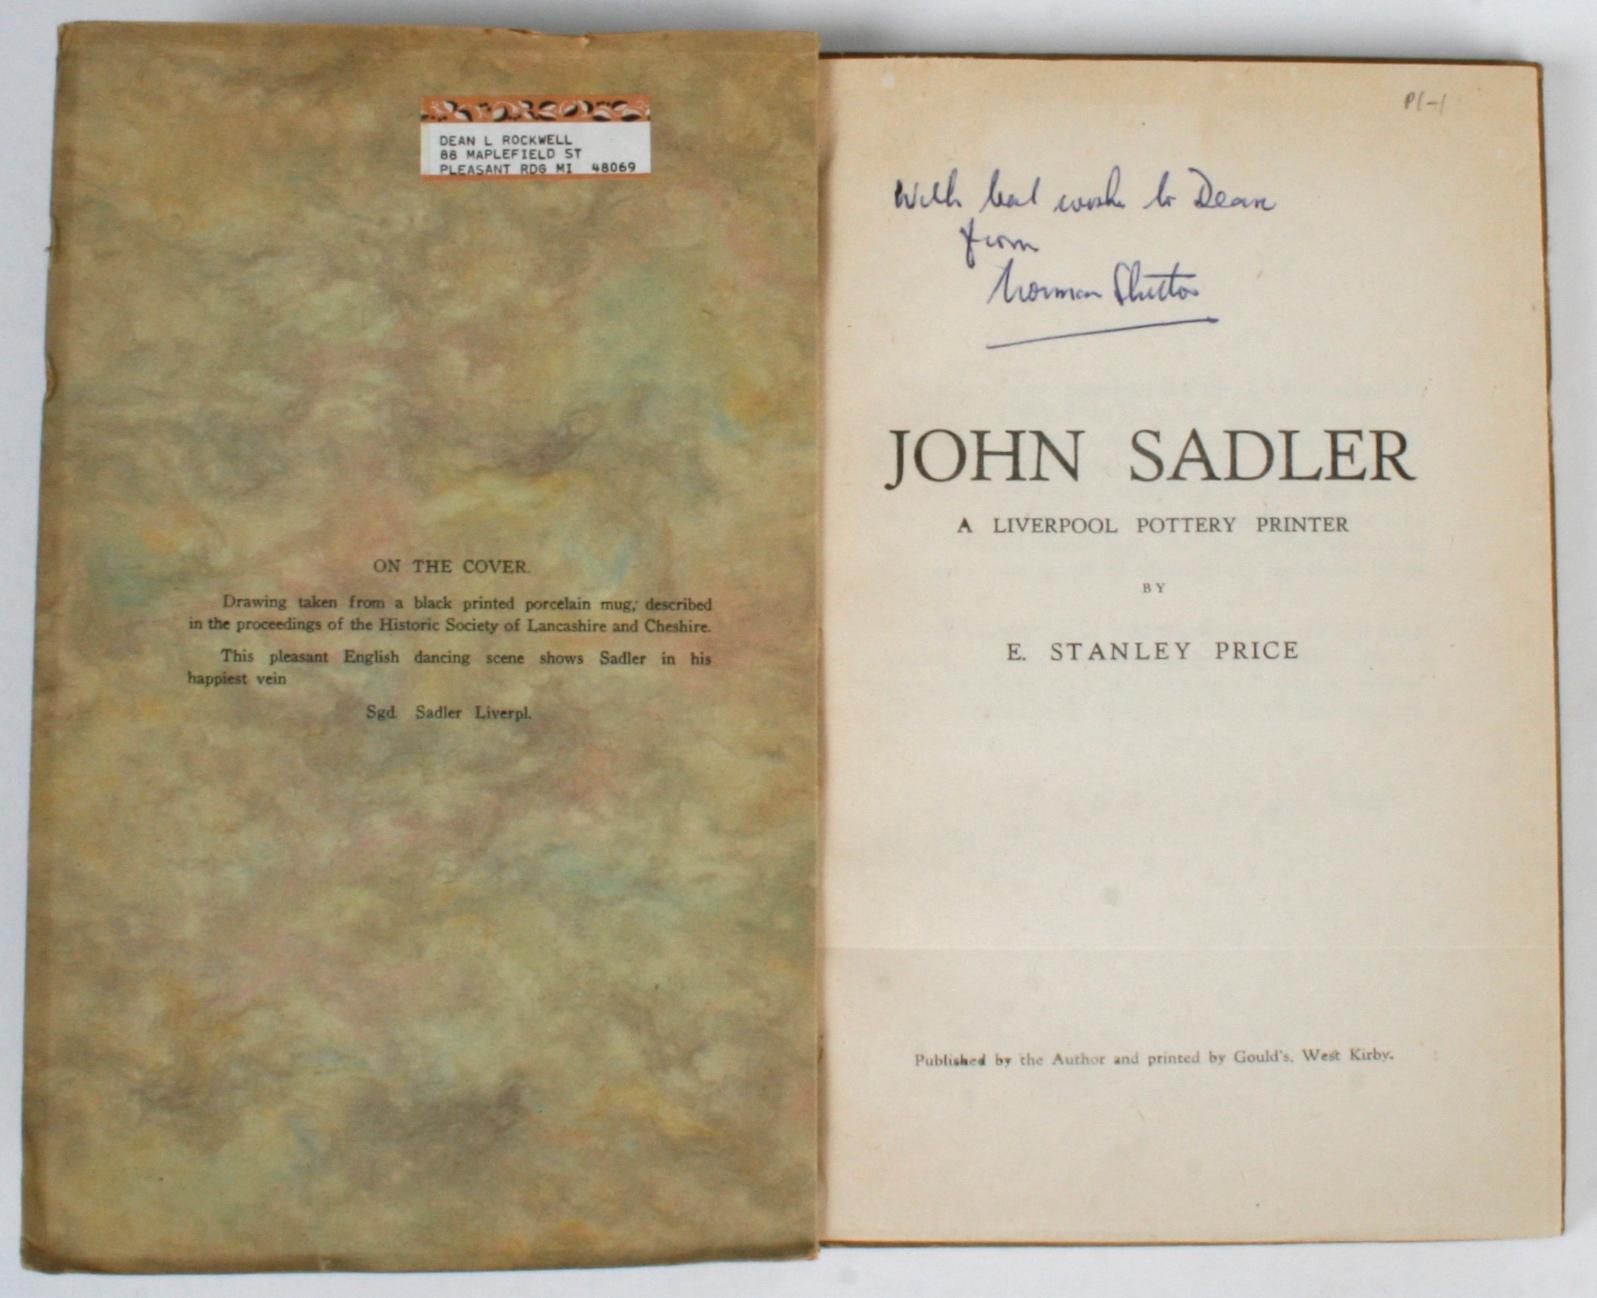 John Sadler, a Liverpool Pottery printer by E. Stanley Price. West Kirby, Cheshire: E. Stanley Price, 1948. Softbound. 144 pp. John Sadler was the inventor of transfer printing on pottery. He was a printer who was inspired by children who used his